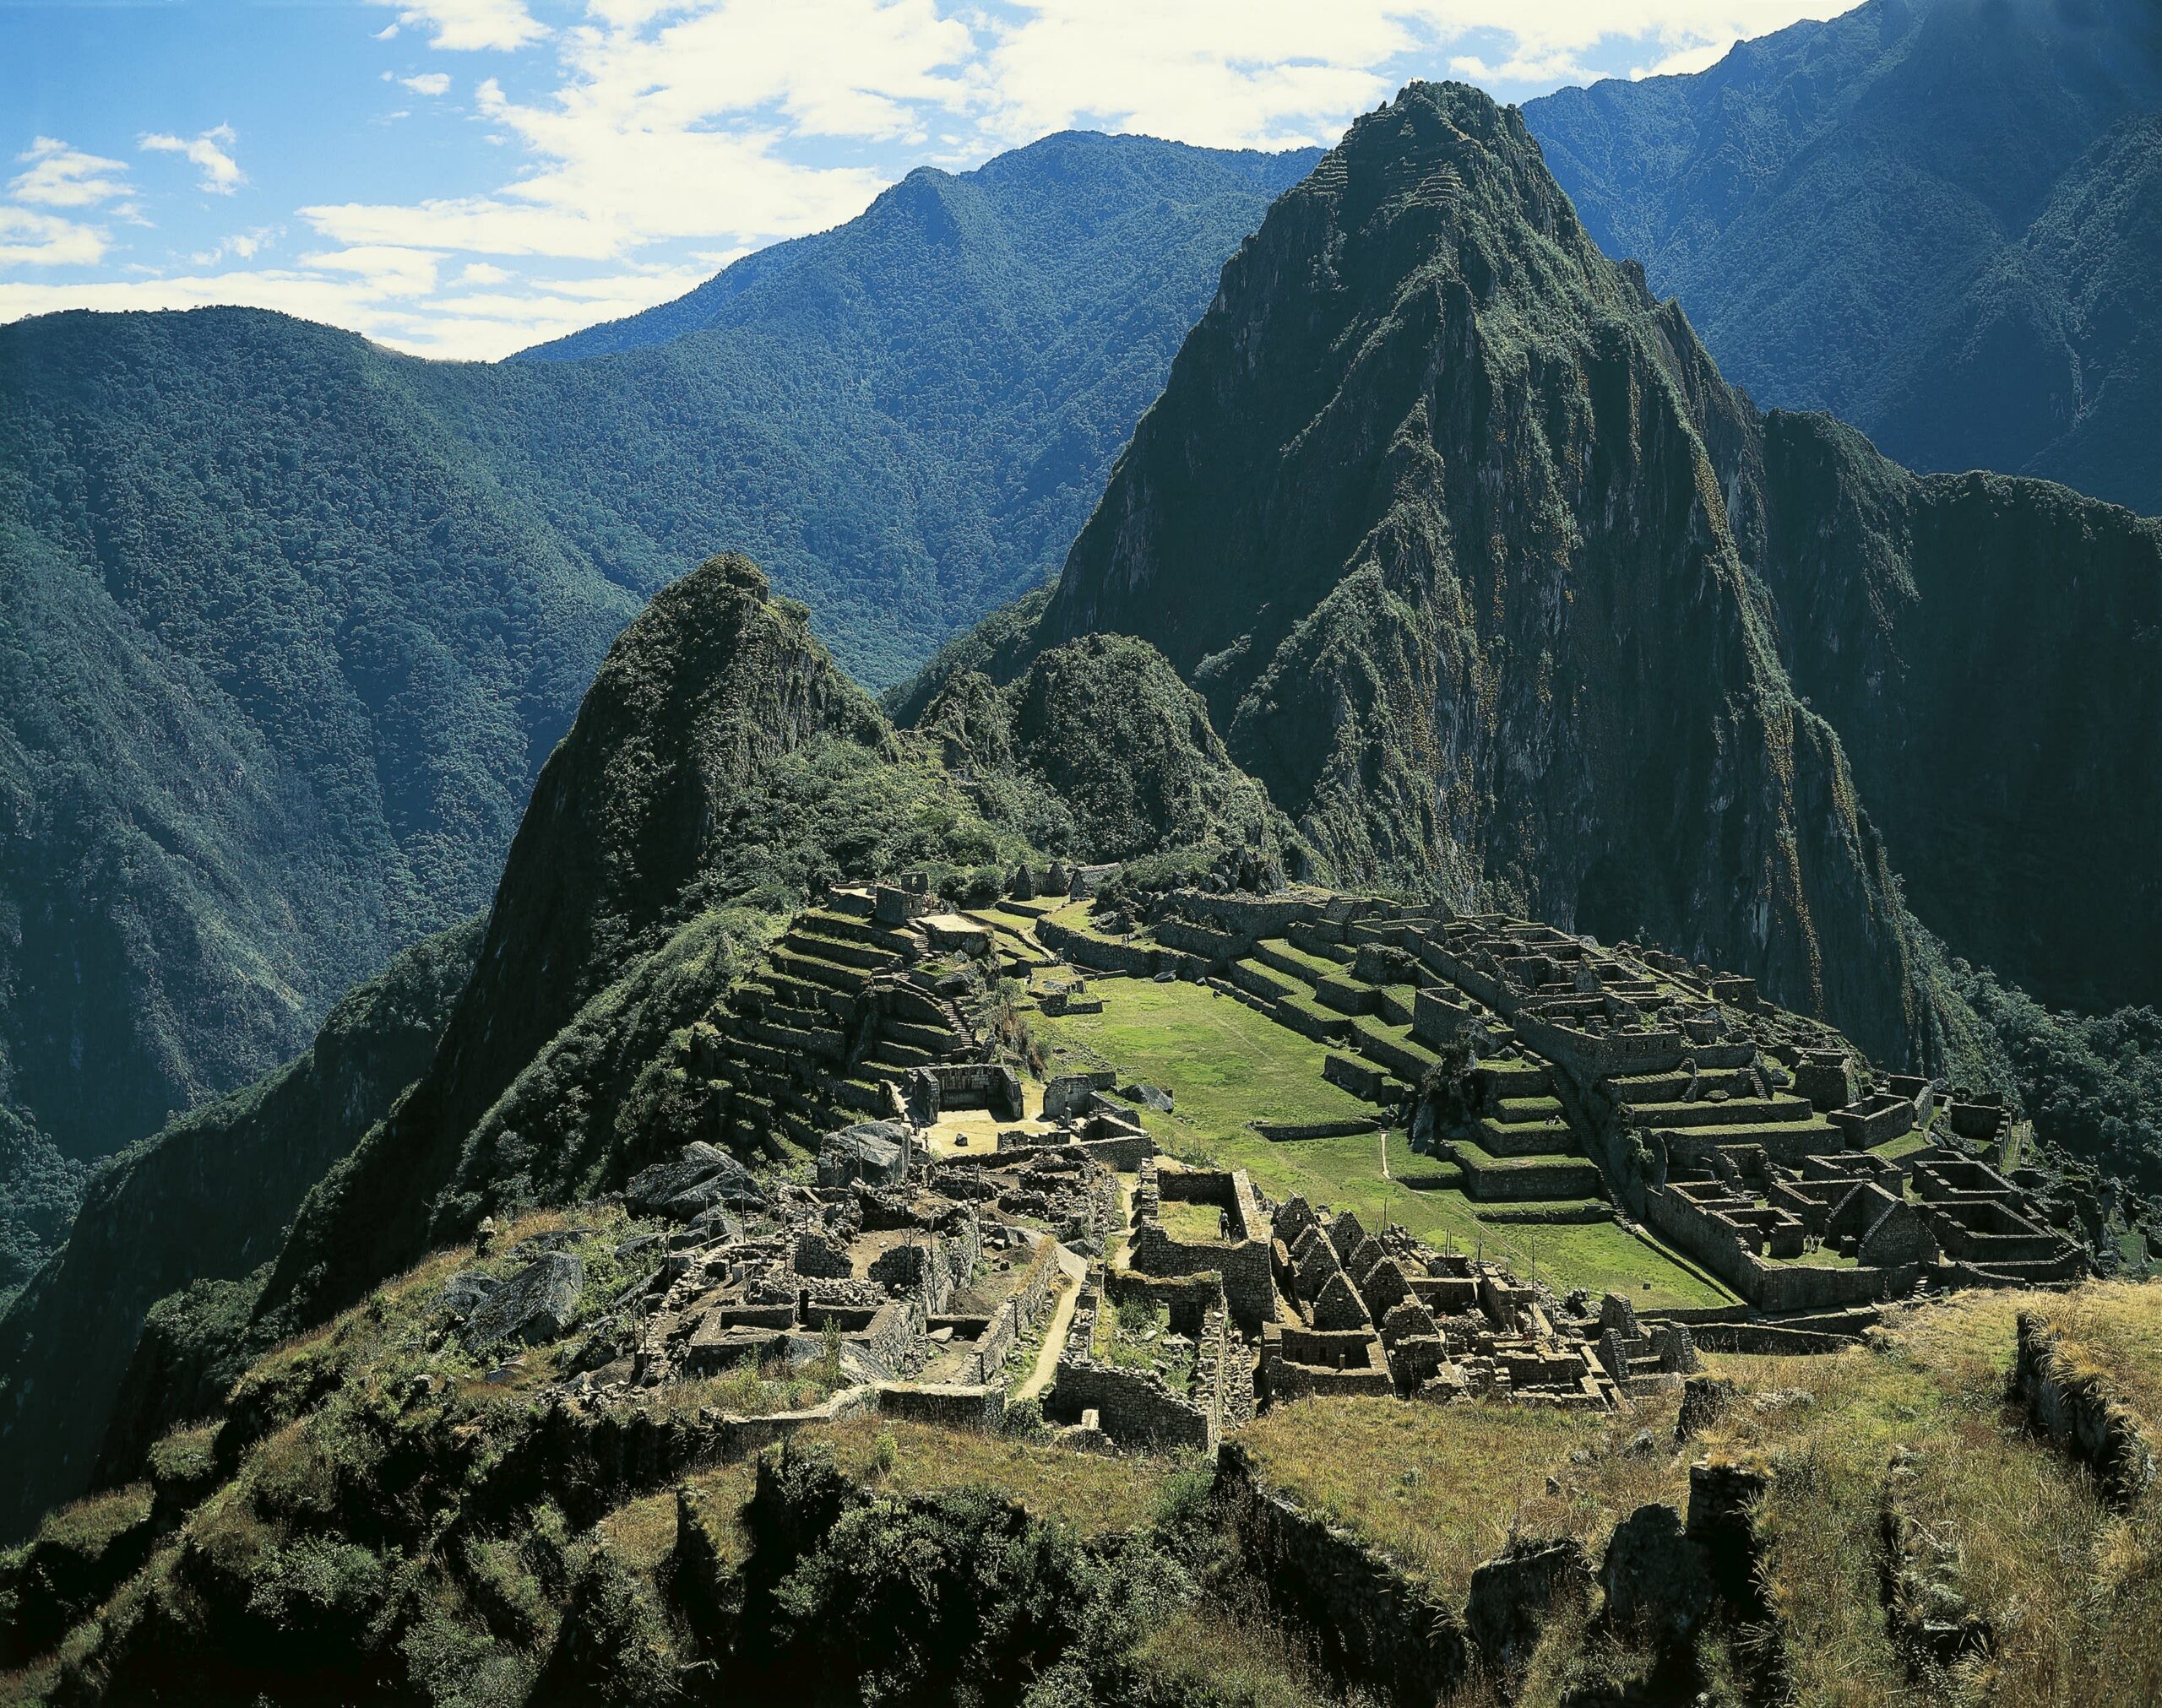 What to find out about planning a visit to Machu Picchu after the pandemic